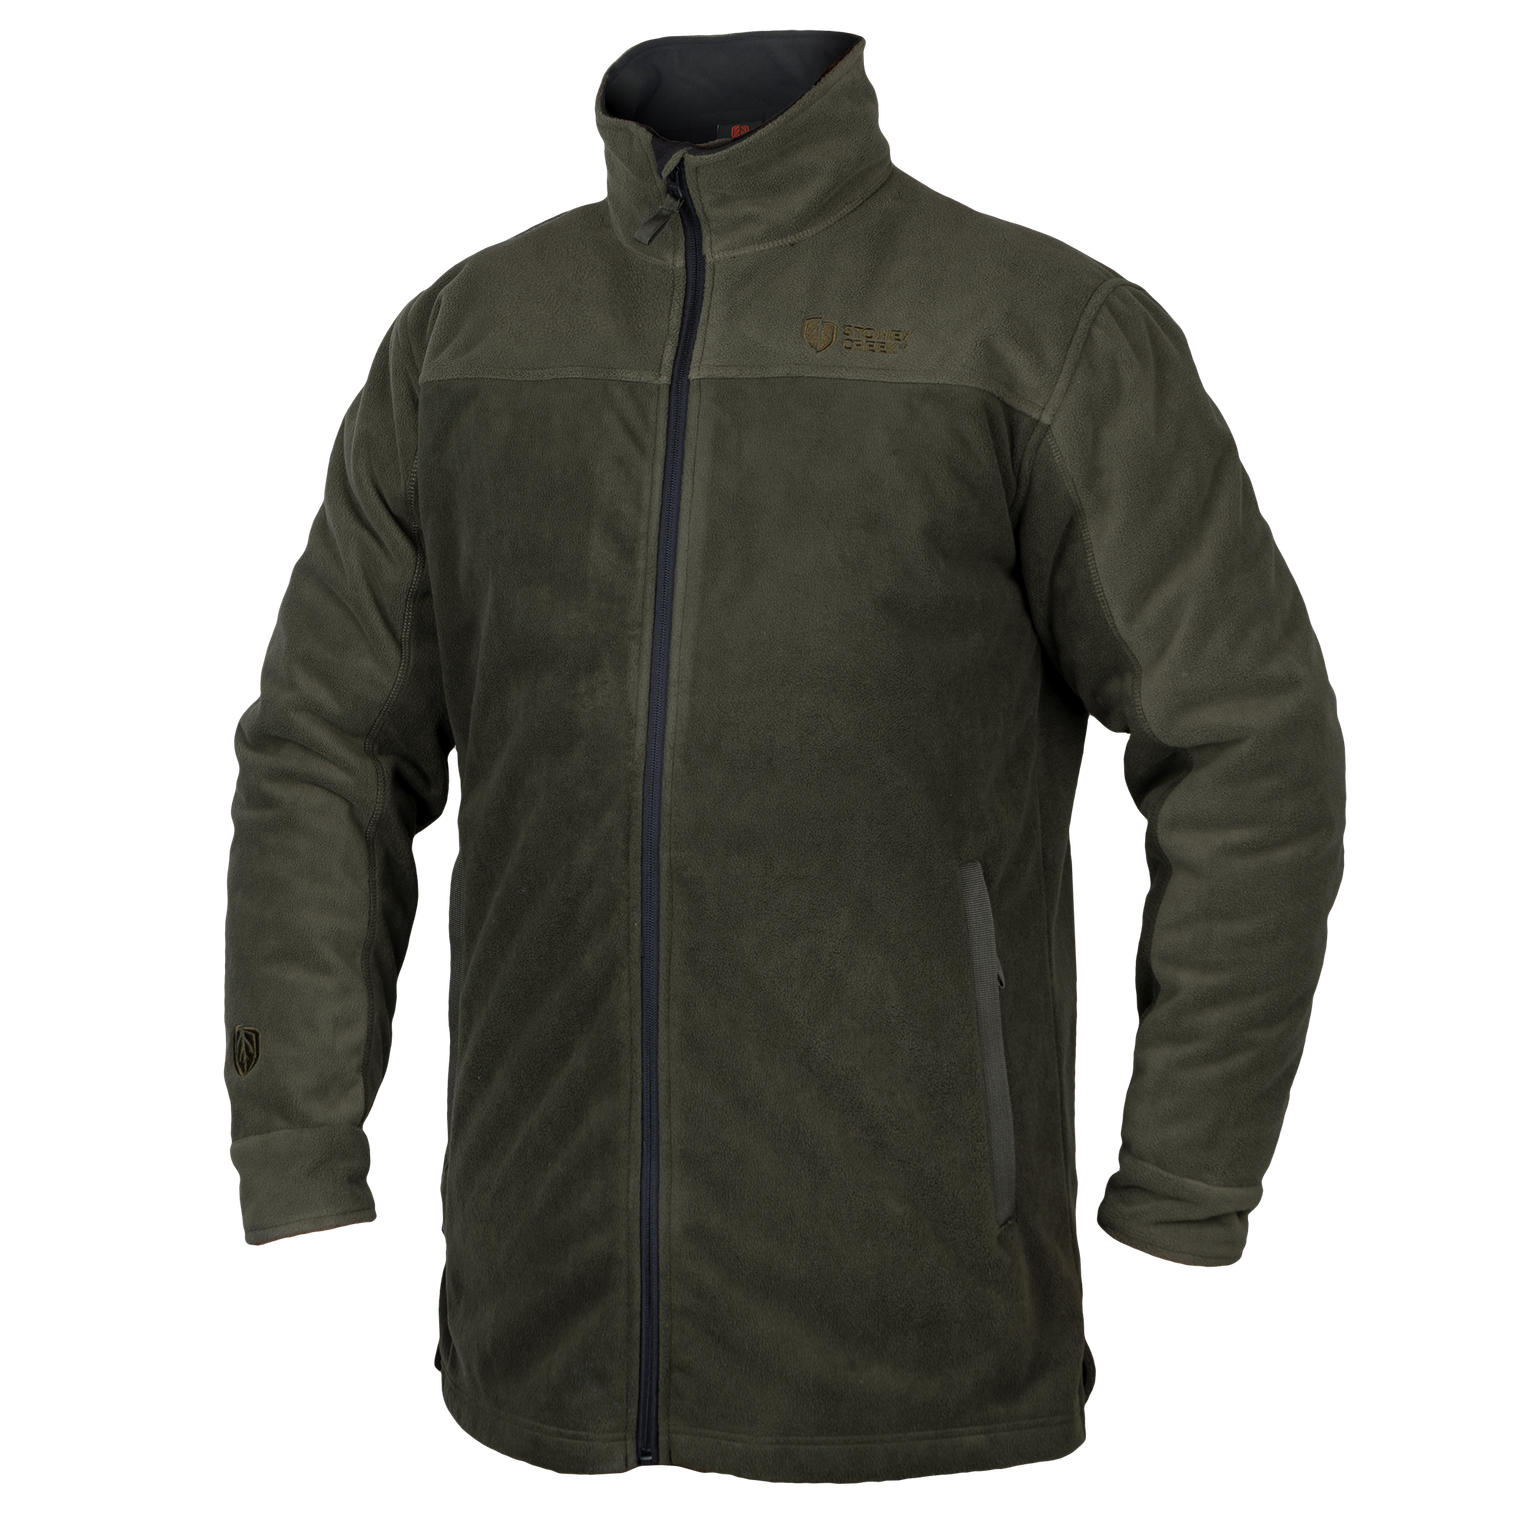 Stoney Creek Mens Zephyr Full Zip Jacket - S / ROISIN/FOREST - Mansfield Hunting & Fishing - Products to prepare for Corona Virus